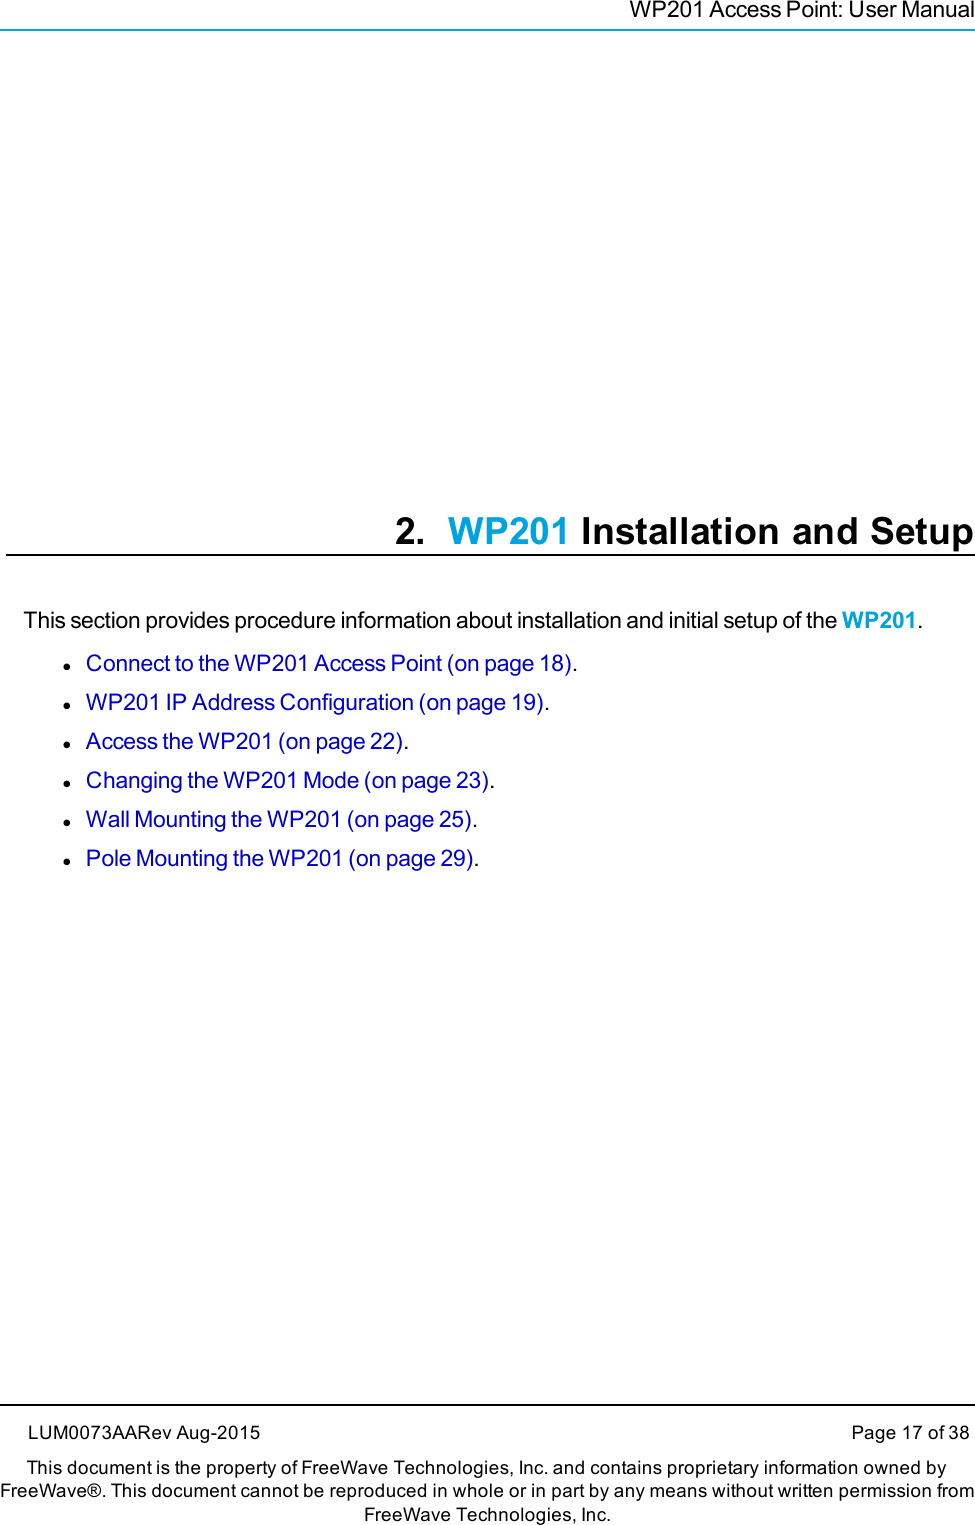 WP201 Access Point: User Manual2. WP201 Installation and SetupThis section provides procedure information about installation and initial setup of the WP201.lConnect to the WP201 Access Point (on page 18).lWP201 IP Address Configuration (on page 19).lAccess the WP201 (on page 22).lChanging the WP201 Mode (on page 23).lWall Mounting the WP201 (on page 25).lPole Mounting the WP201 (on page 29).LUM0073AARev Aug-2015 Page 17 of 38This document is the property of FreeWave Technologies, Inc. and contains proprietary information owned byFreeWave®. This document cannot be reproduced in whole or in part by any means without written permission fromFreeWave Technologies, Inc.